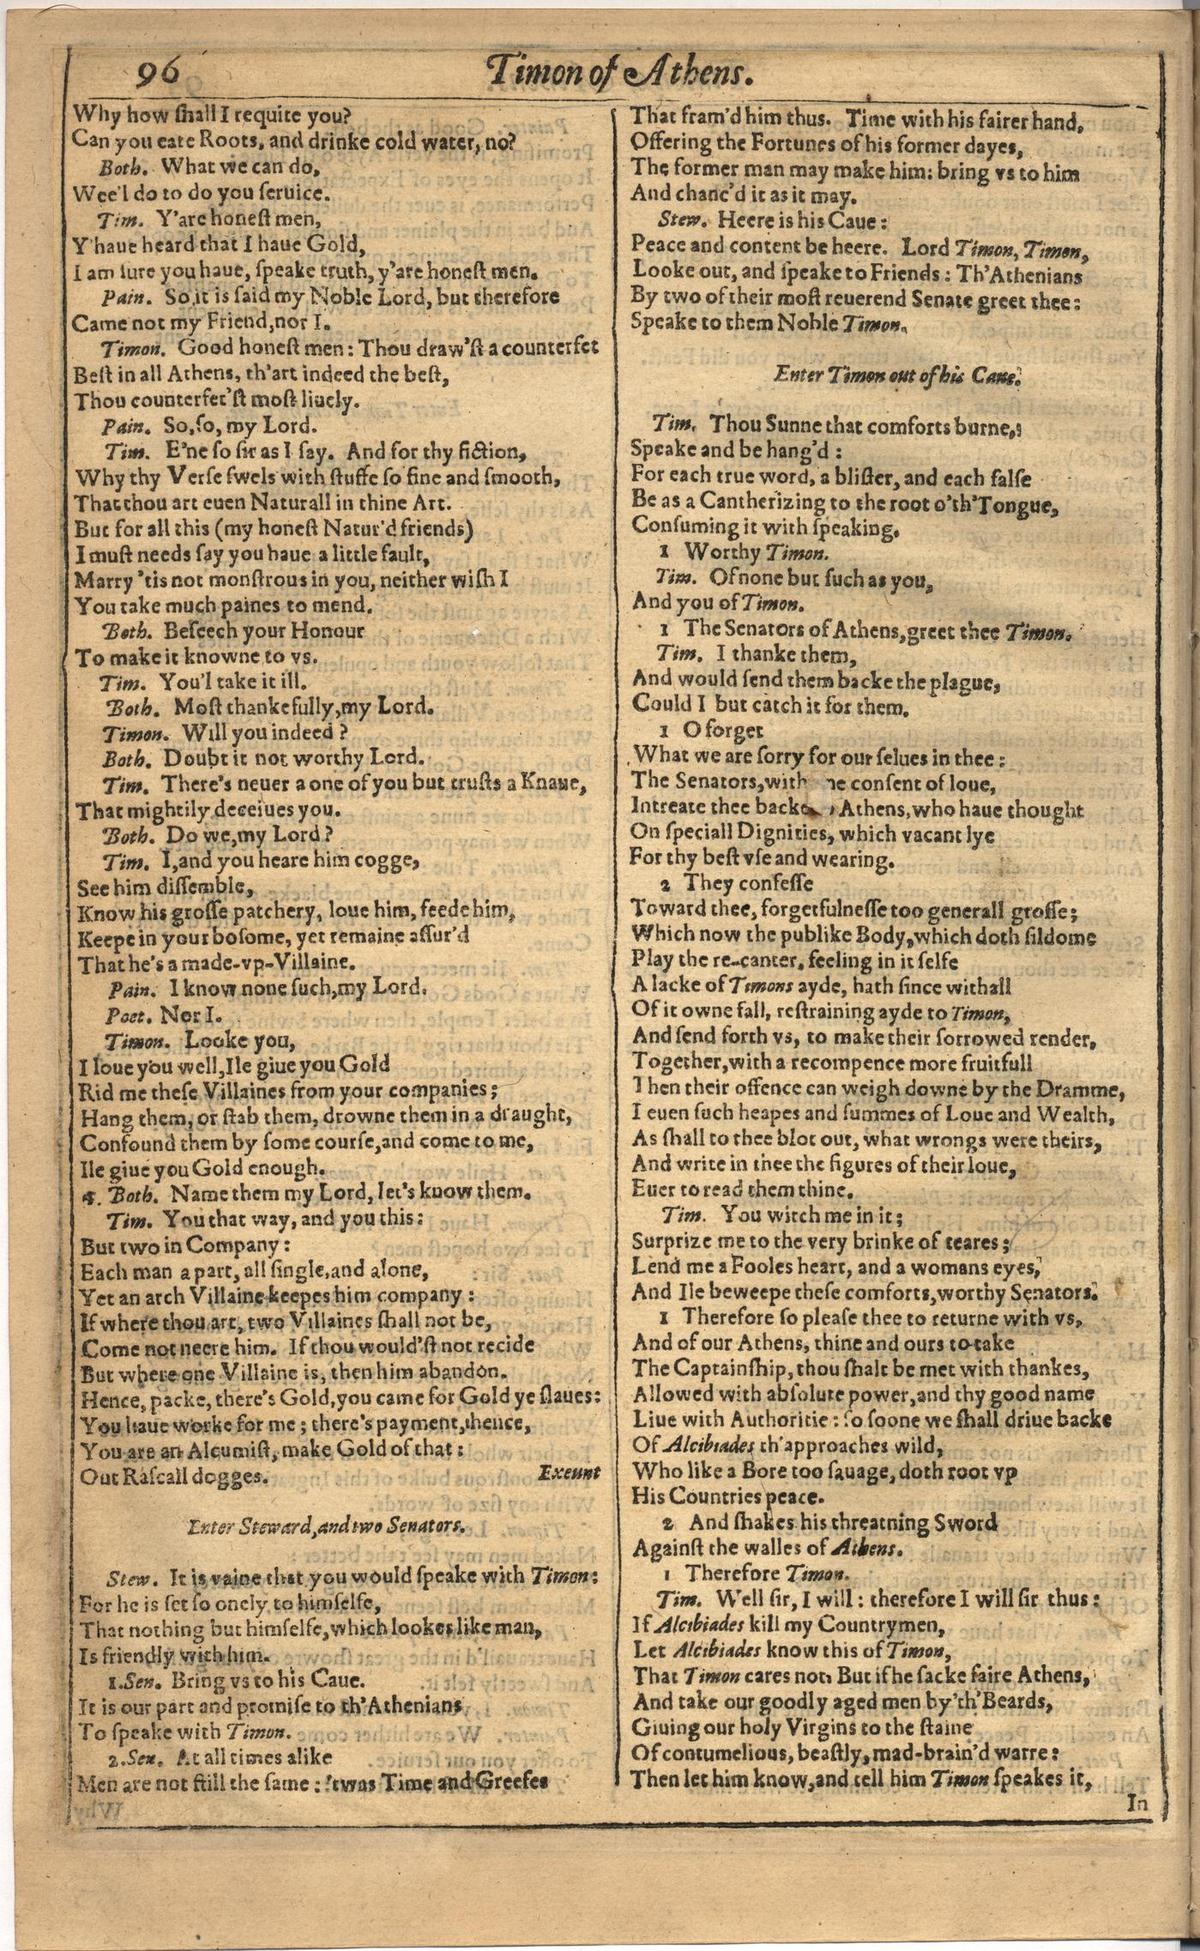 Image of page 712